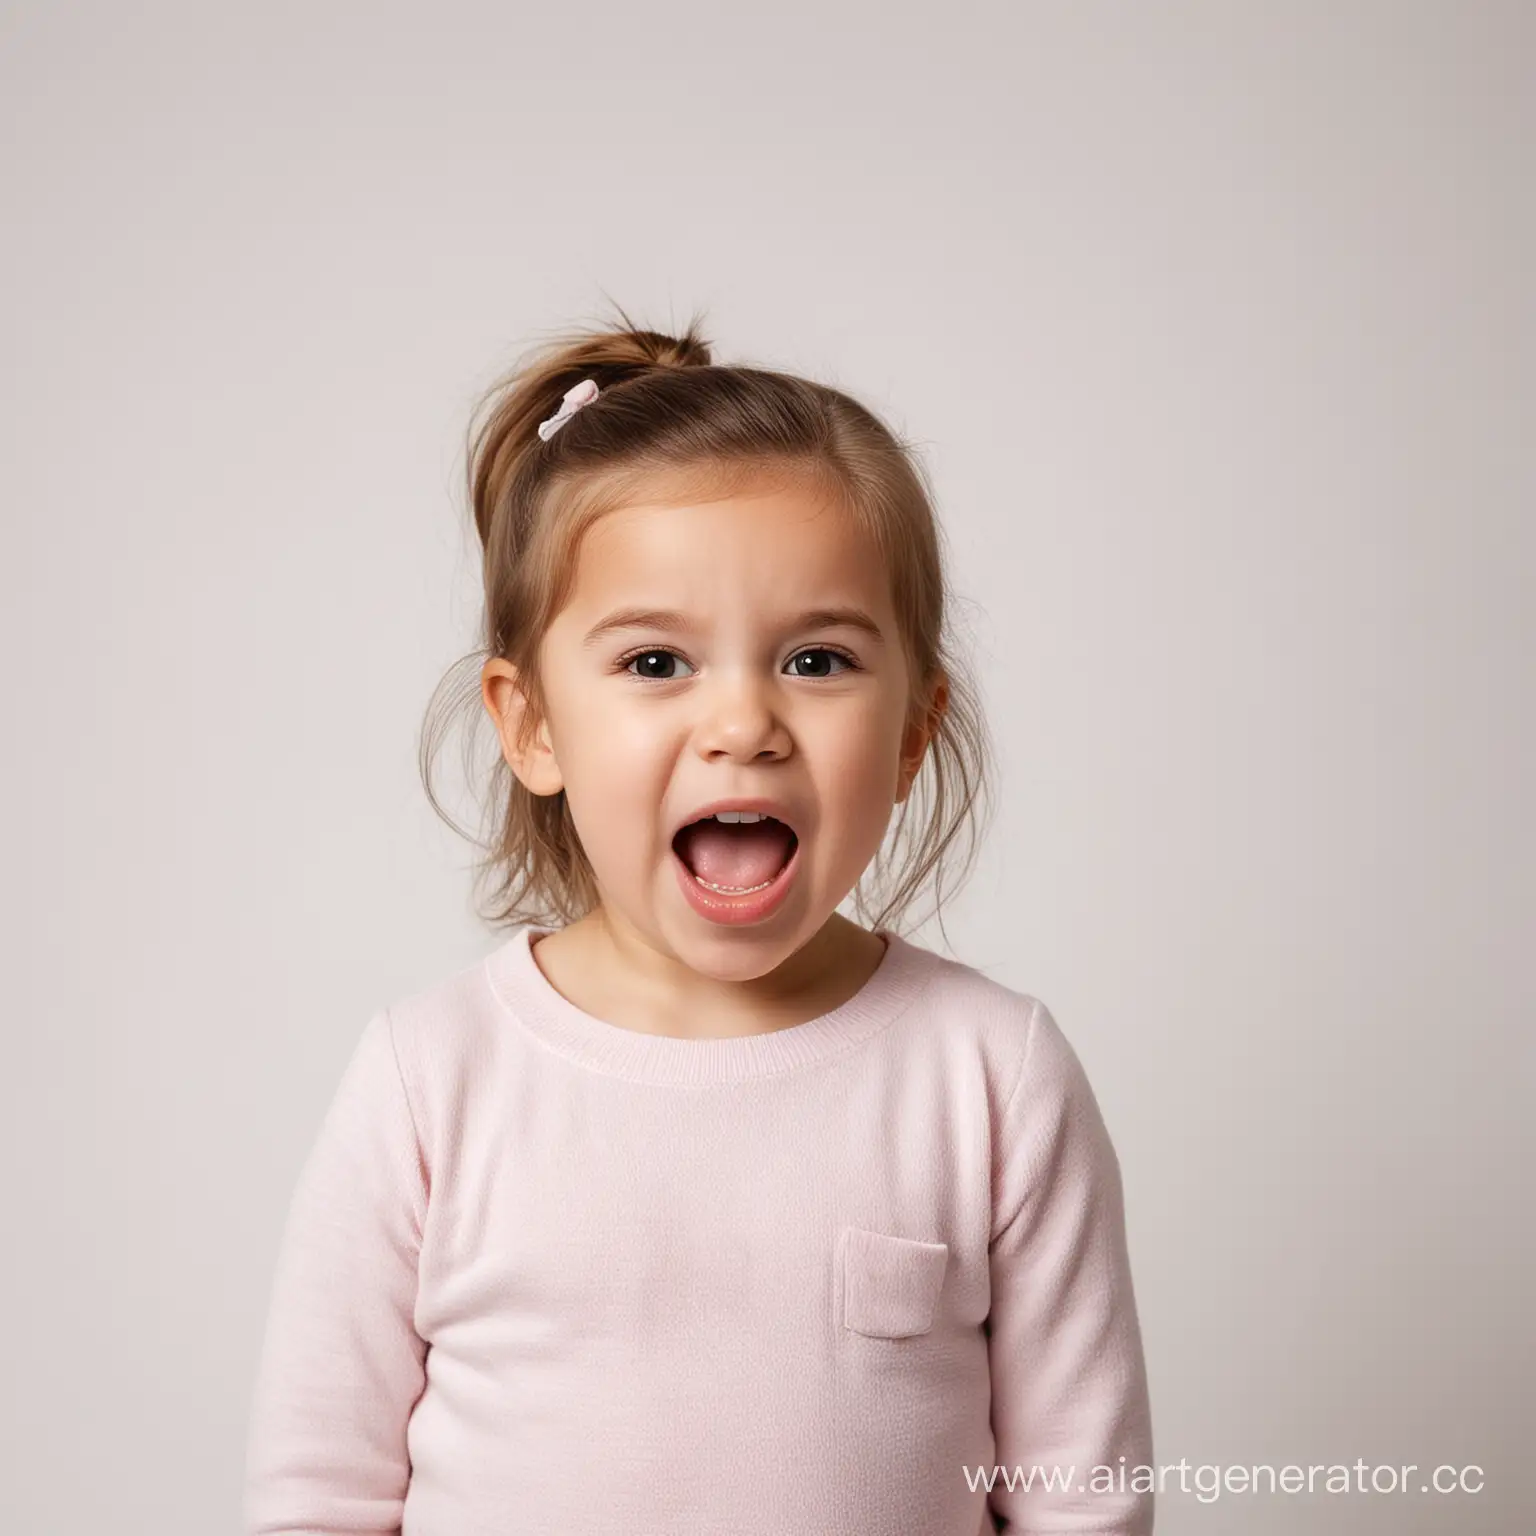 A cute little girl standing with one's mouth wide, white background.